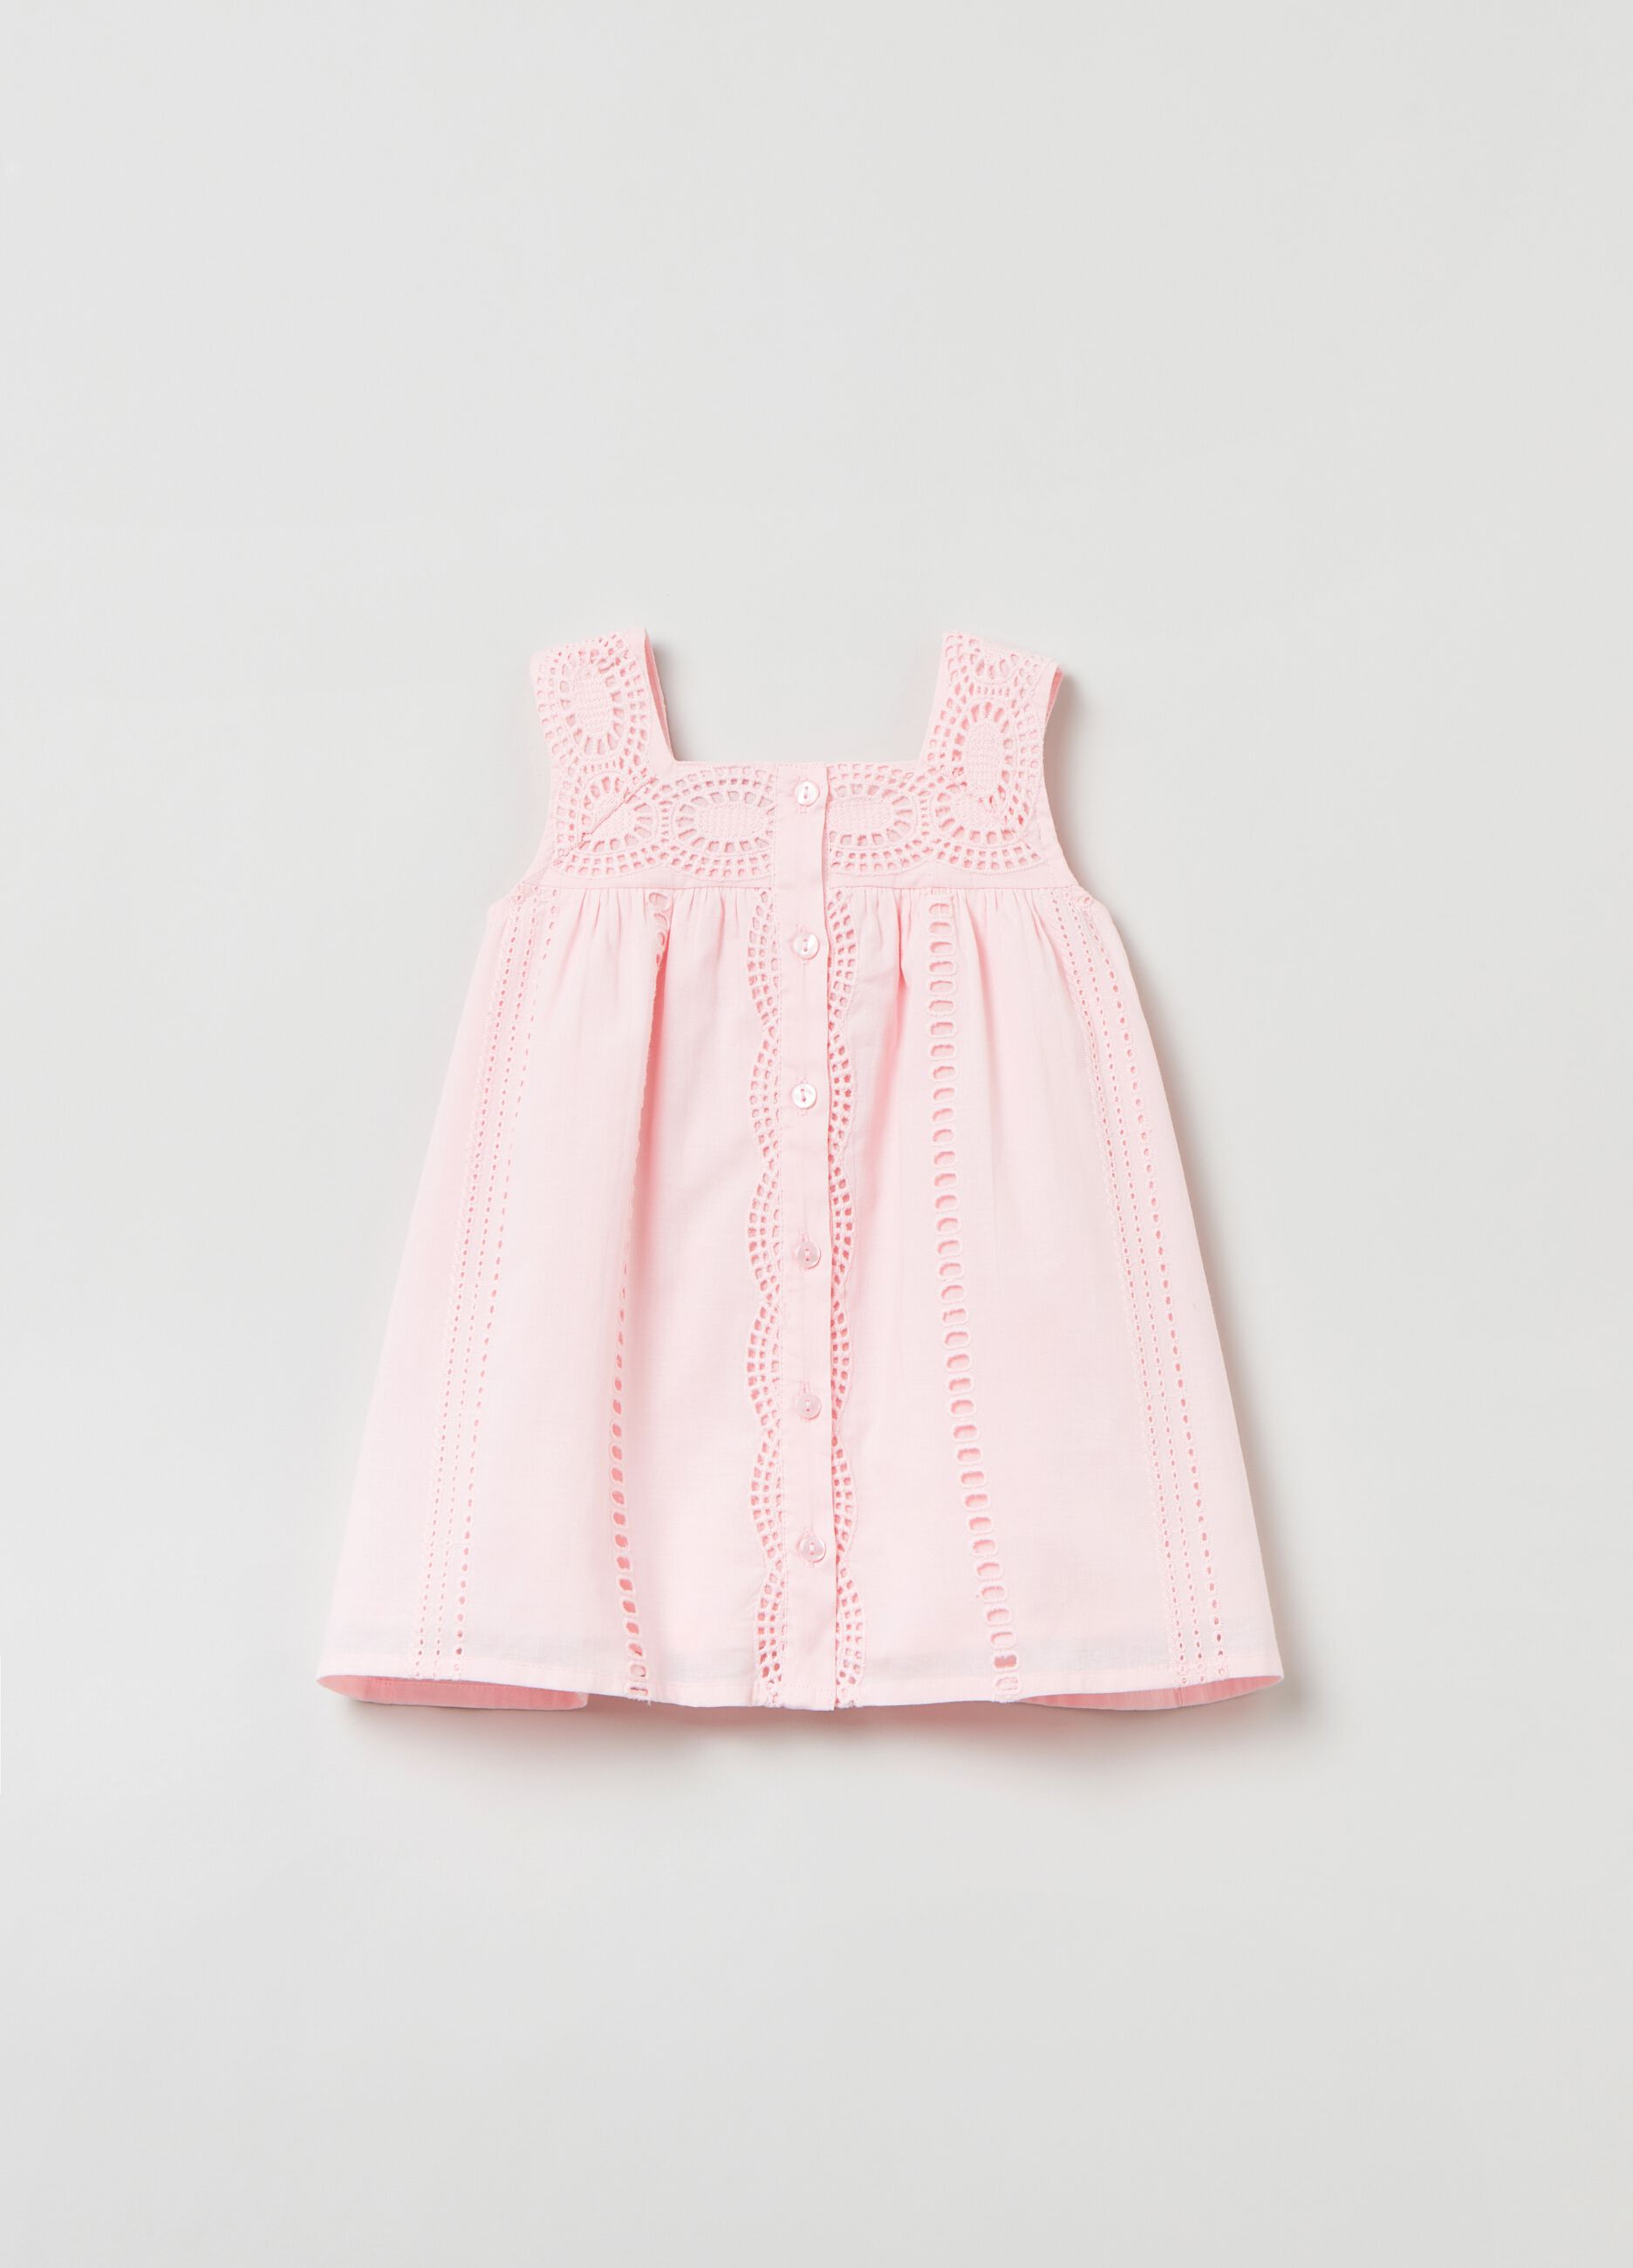 Sleeveless dress in broderie anglaise cotton